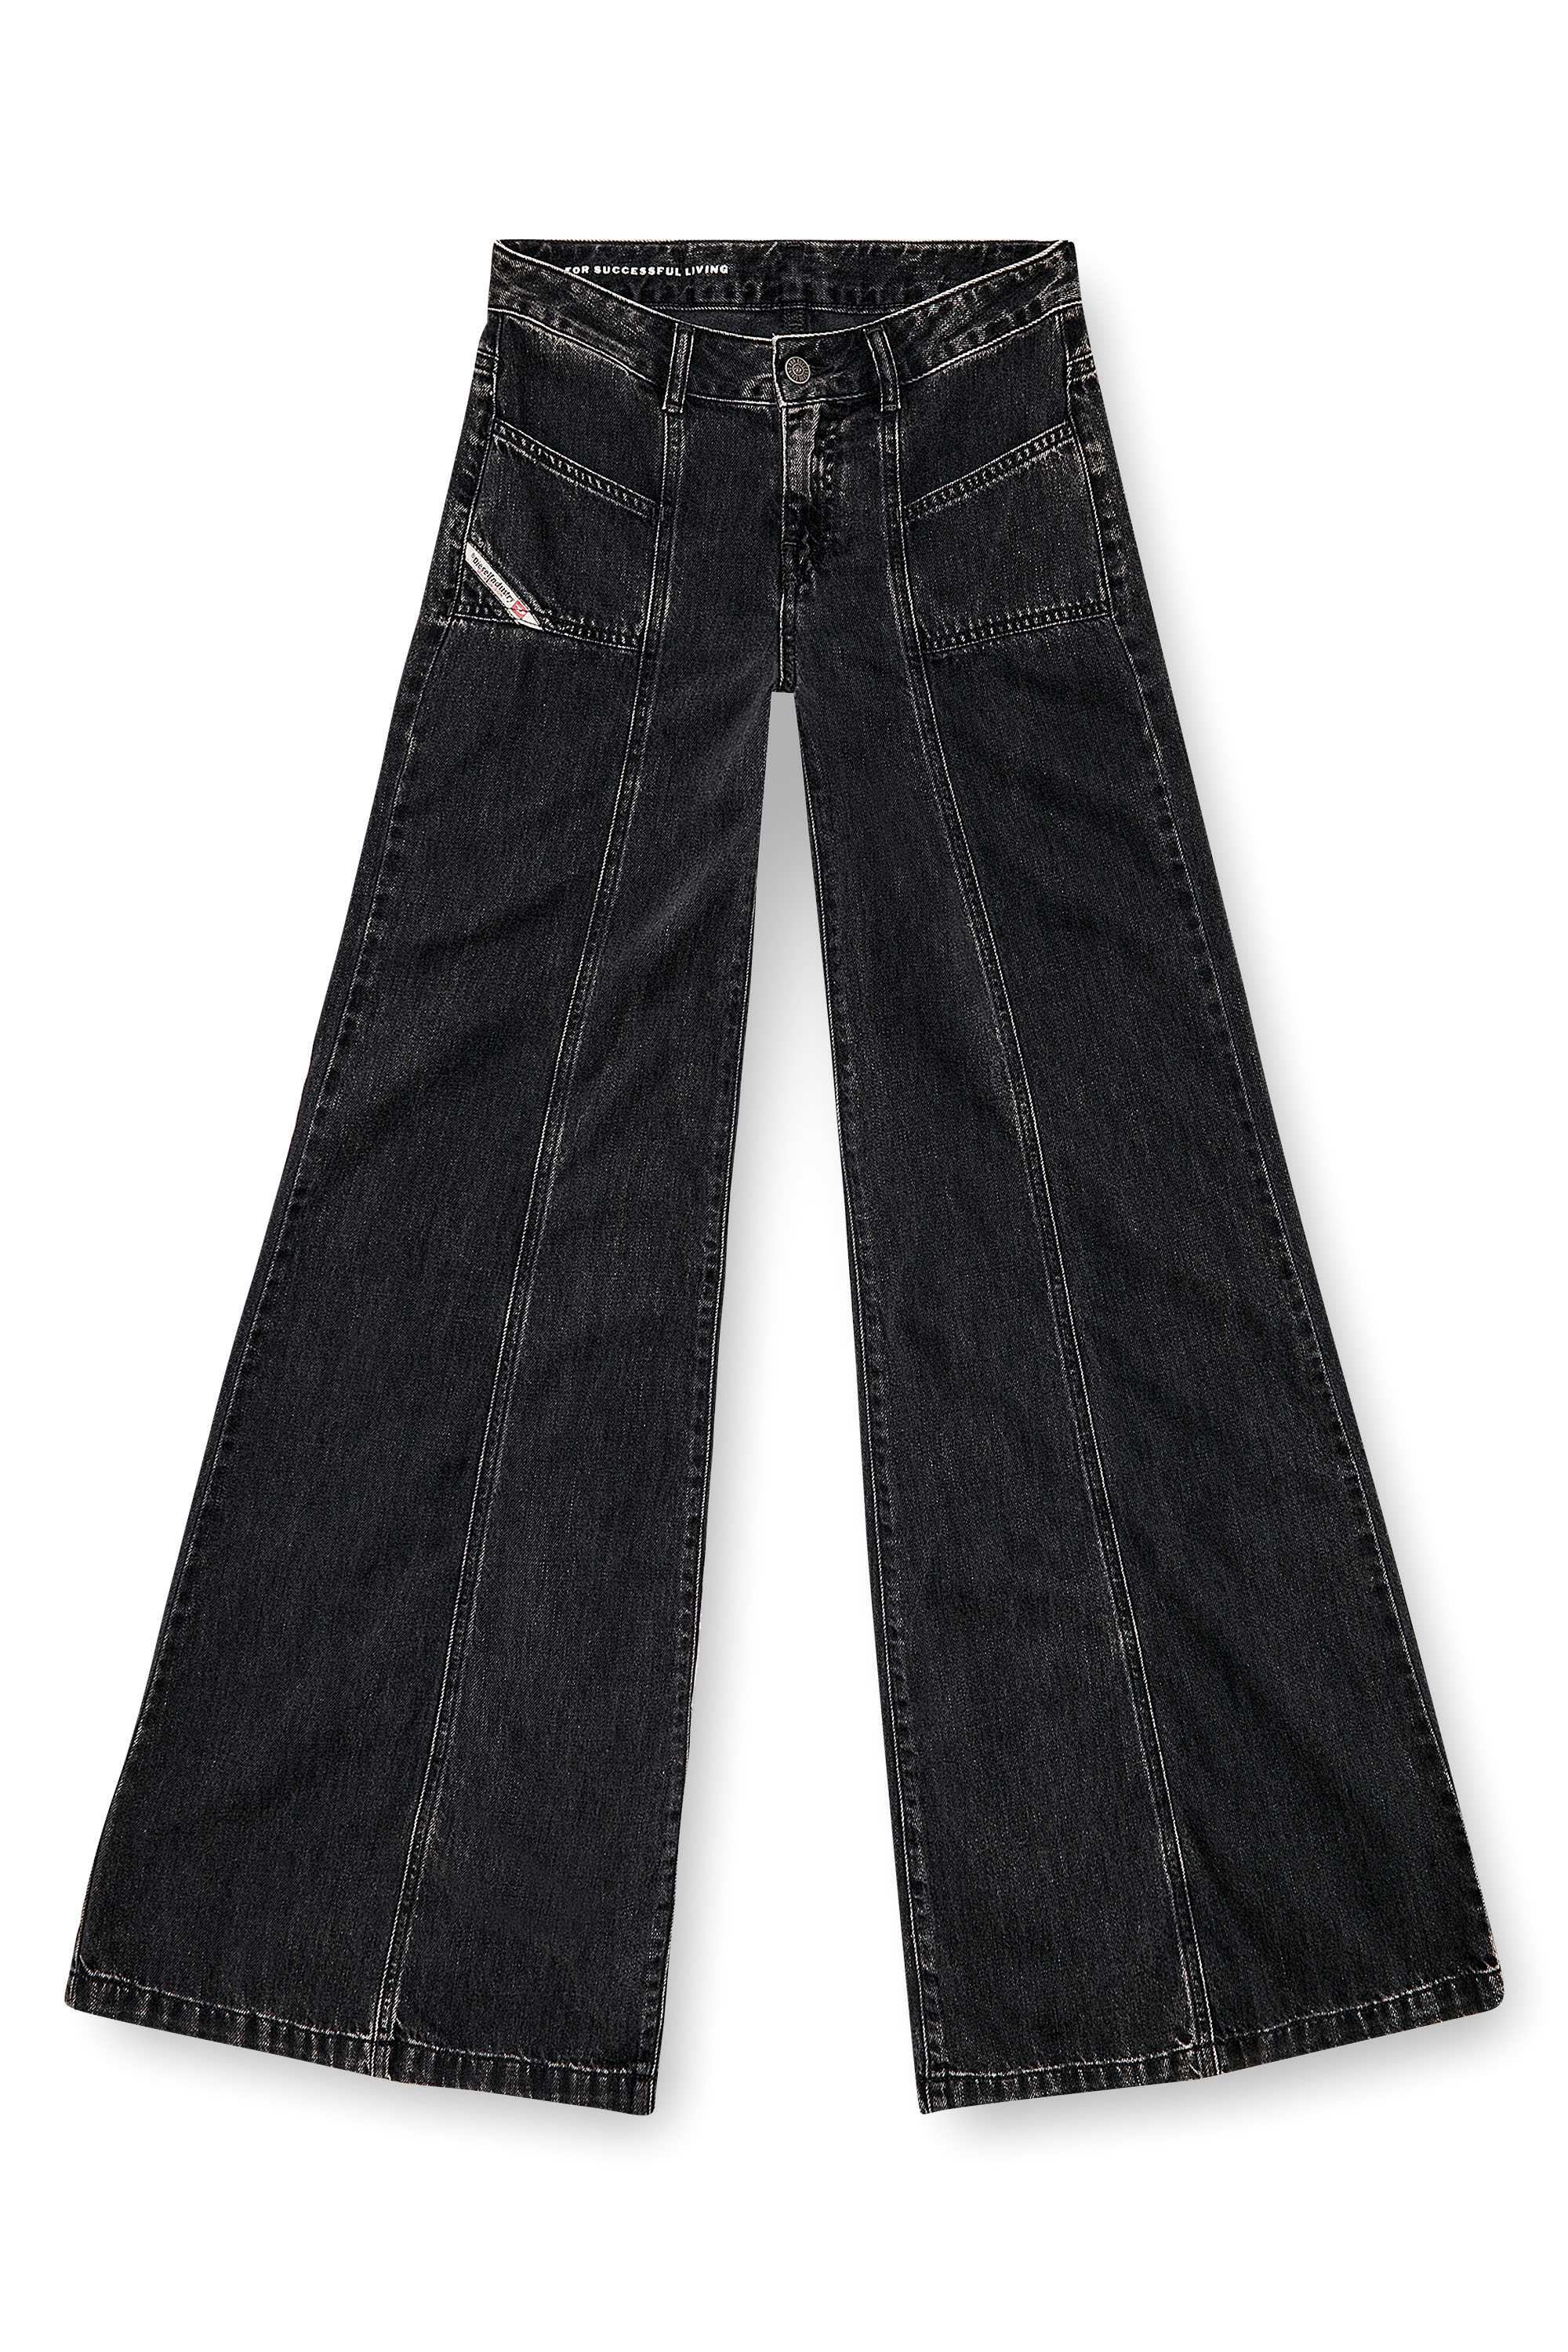 Diesel - Bootcut and Flare Jeans D-Akii 068HN, Mujer Bootcut y Flare Jeans - D-Akii in Negro - Image 3